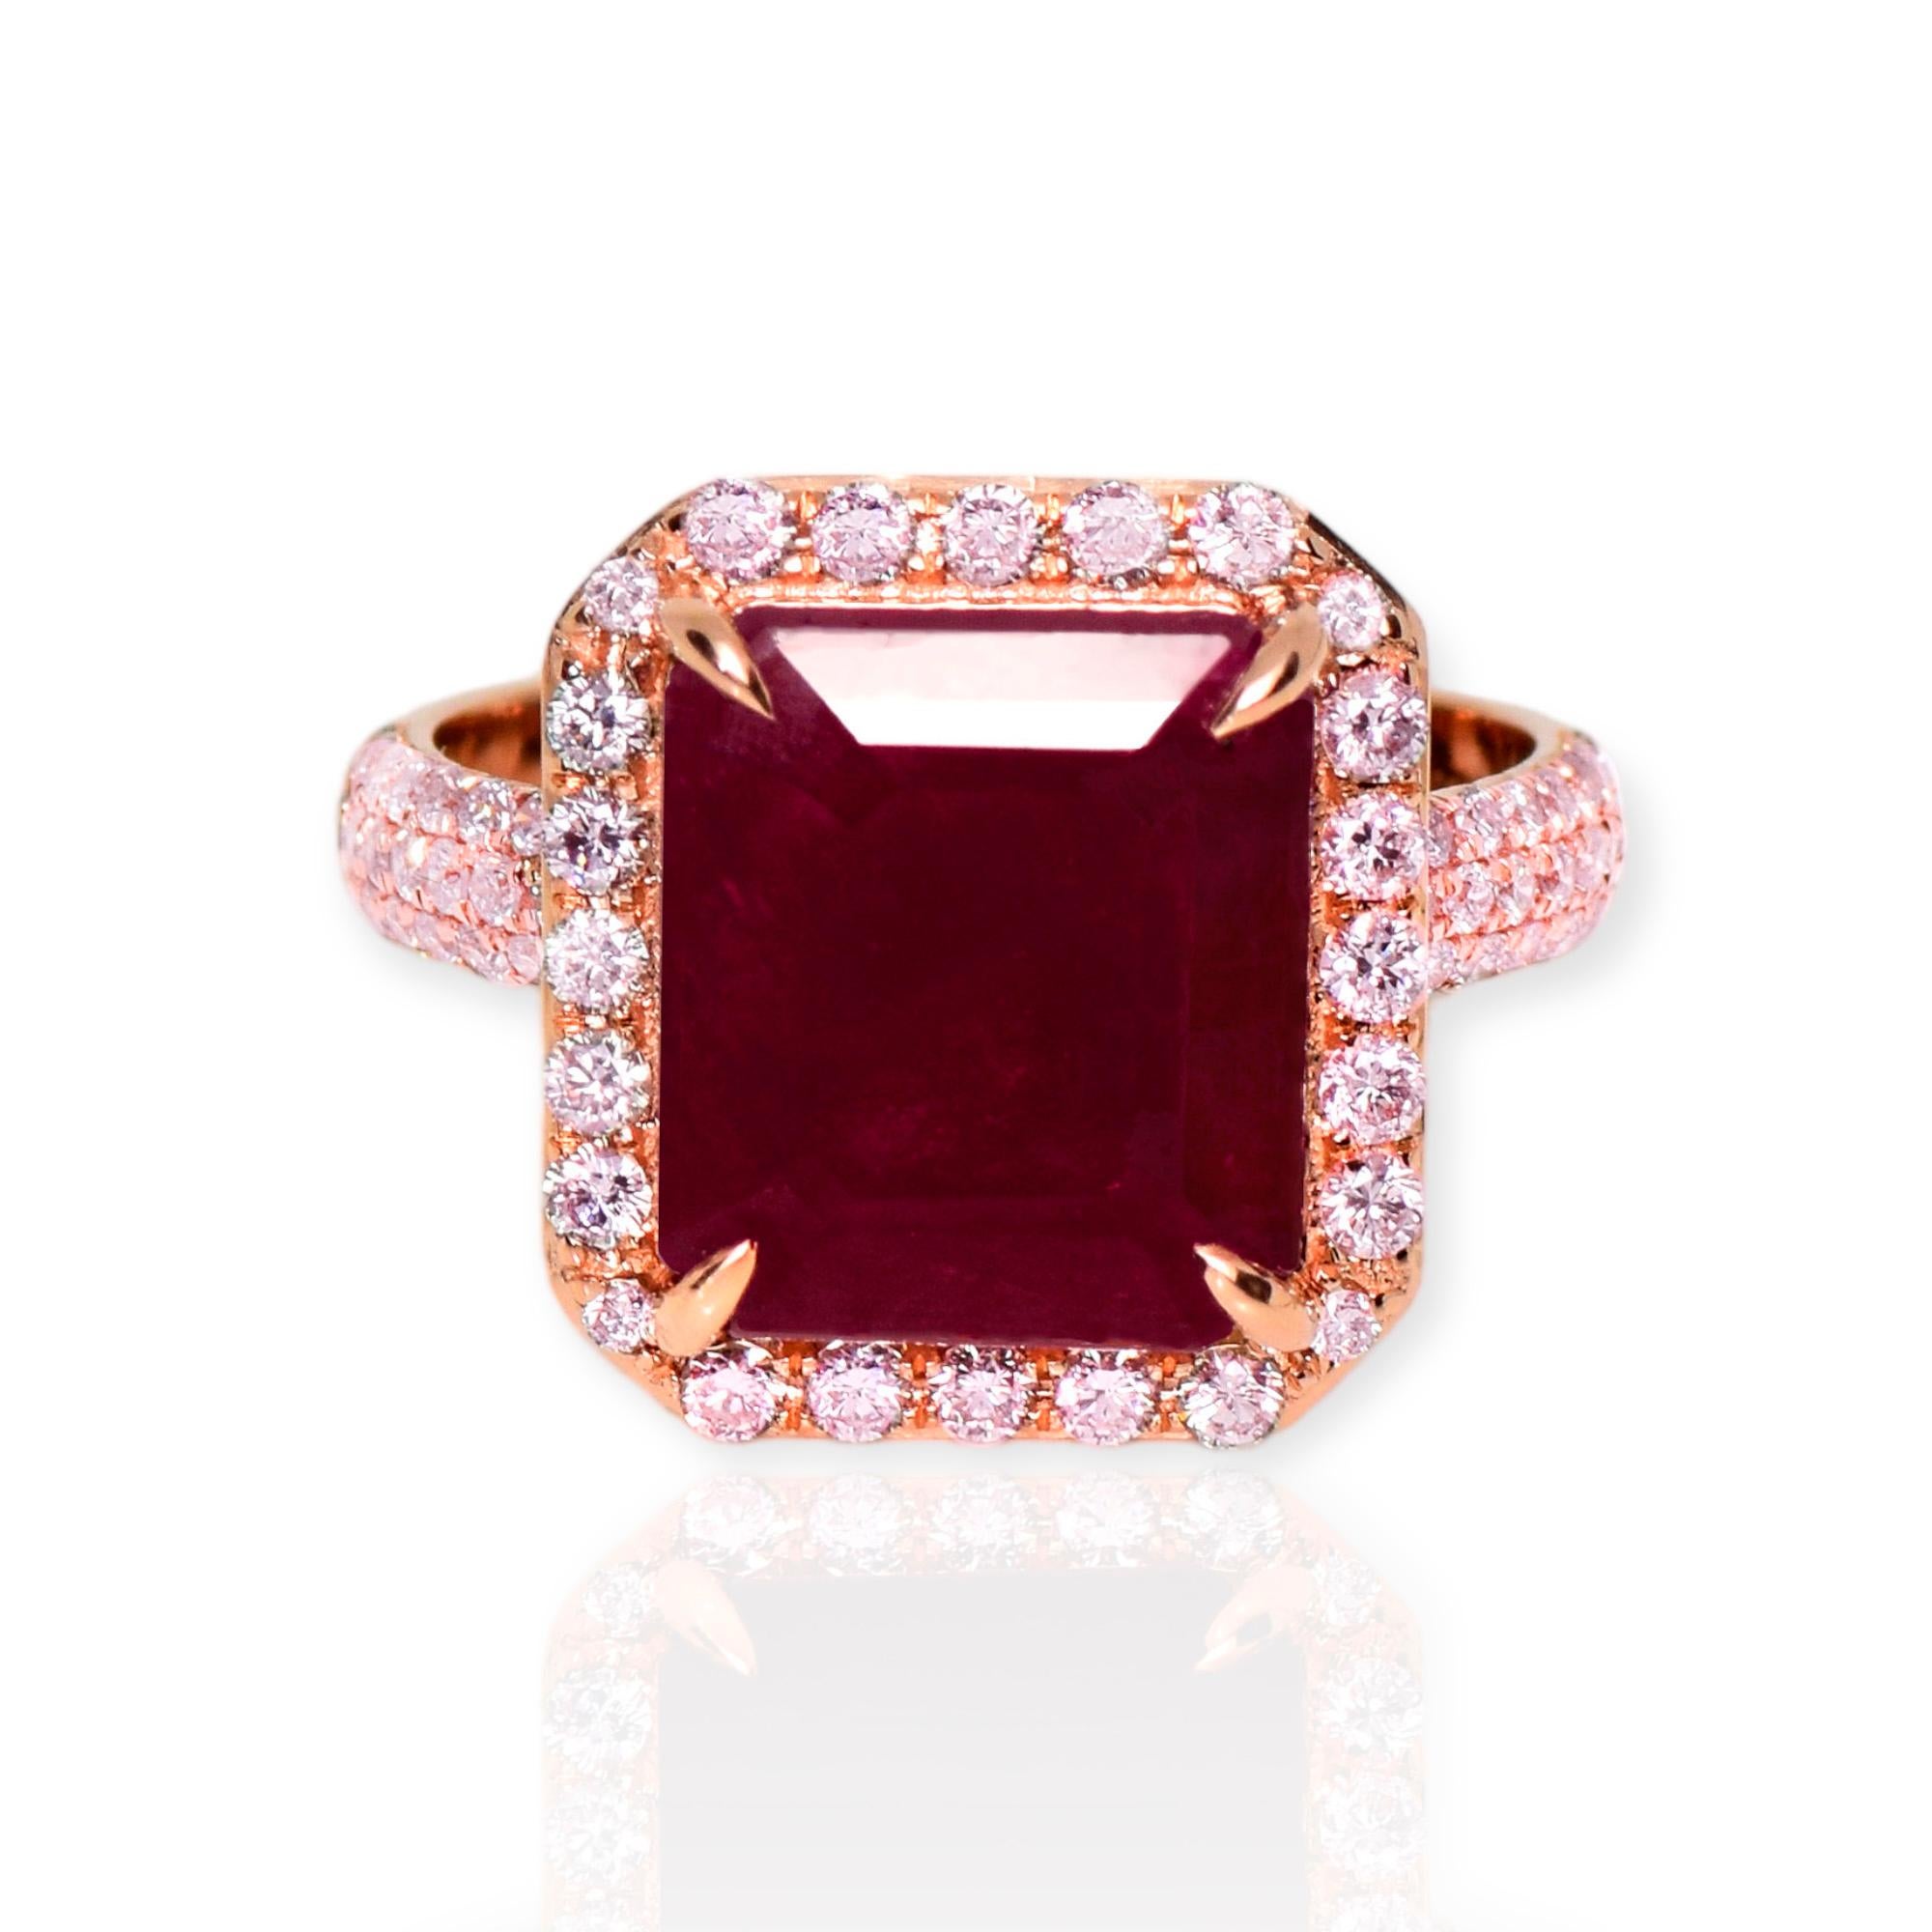 *IGI 14K 6.70 ct Natural Unheated Red Ruby&0.77 ct Pink Diamonds Engagement Ring*

IGI-certified natural untreated, deep red ruby weighing 6.70 ct set on 14K rose gold luxury table pave' design band with natural pink diamonds weighing 0.77 ct. 